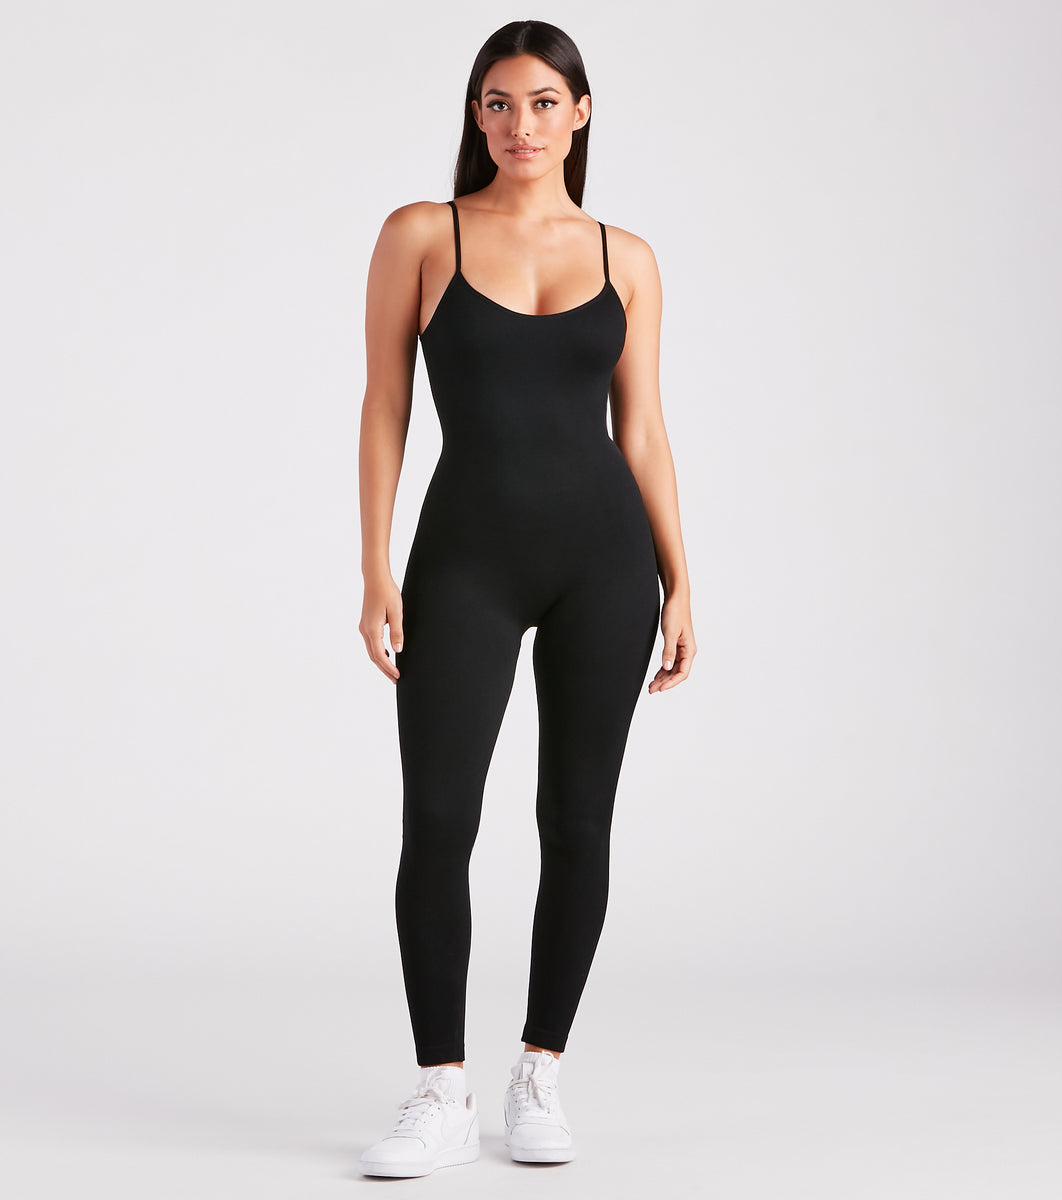 Need-Now Sleeveless Knit Catsuit